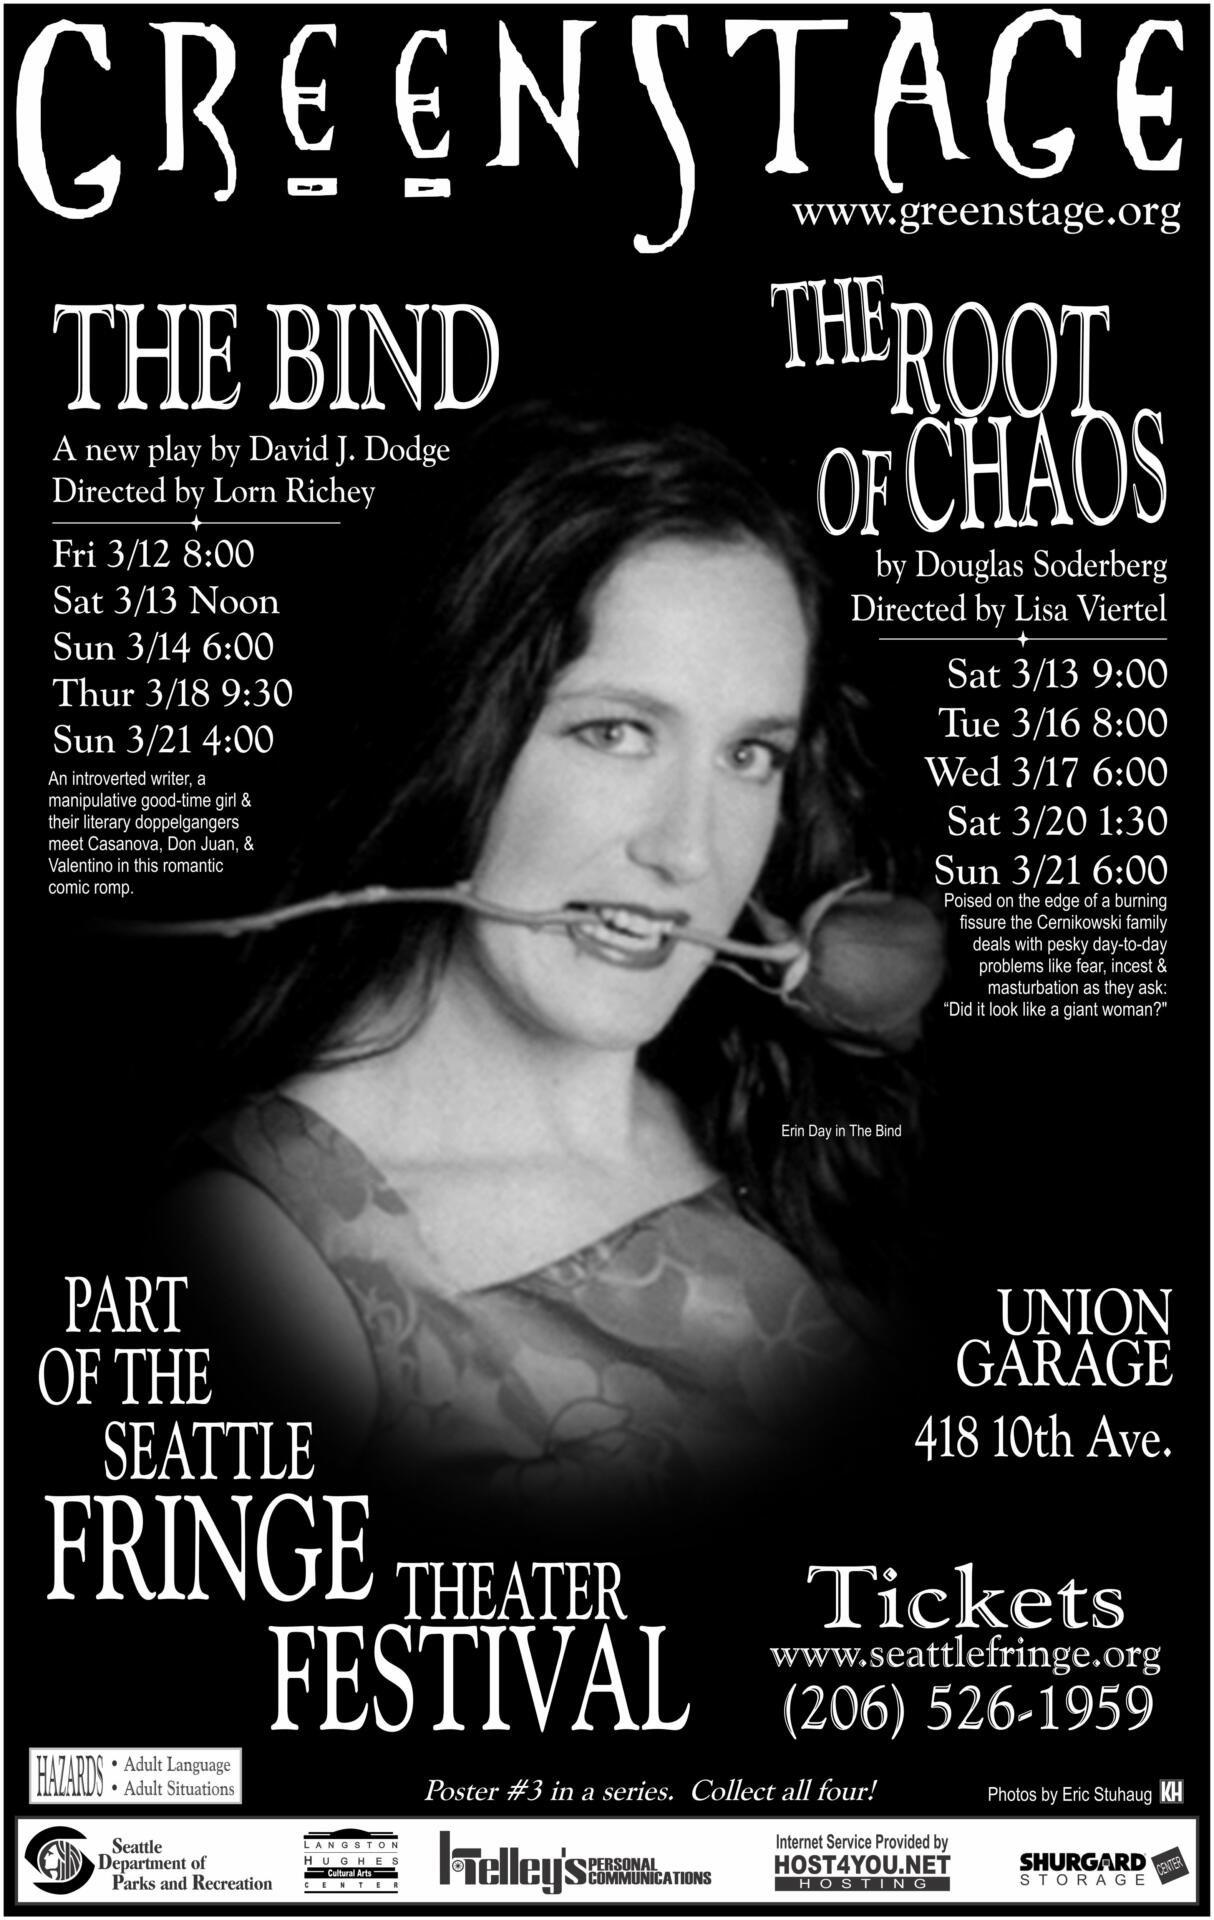 Fringe Festival poster from 1999. Four different posters were used. This one features Erin Day